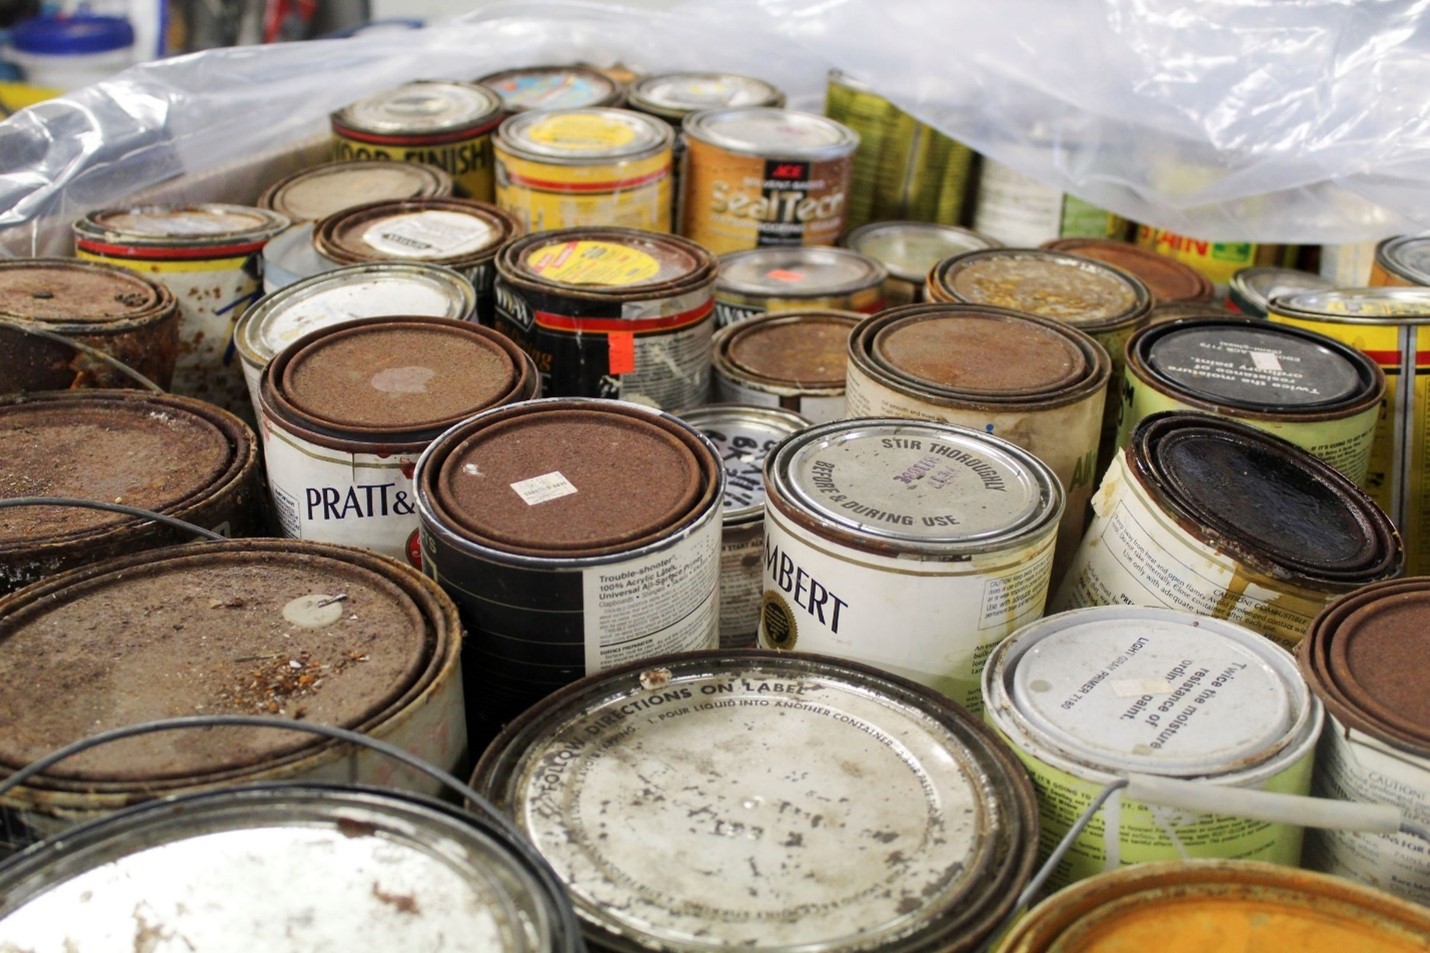 A closeup image of several rusted cans of paint and stains